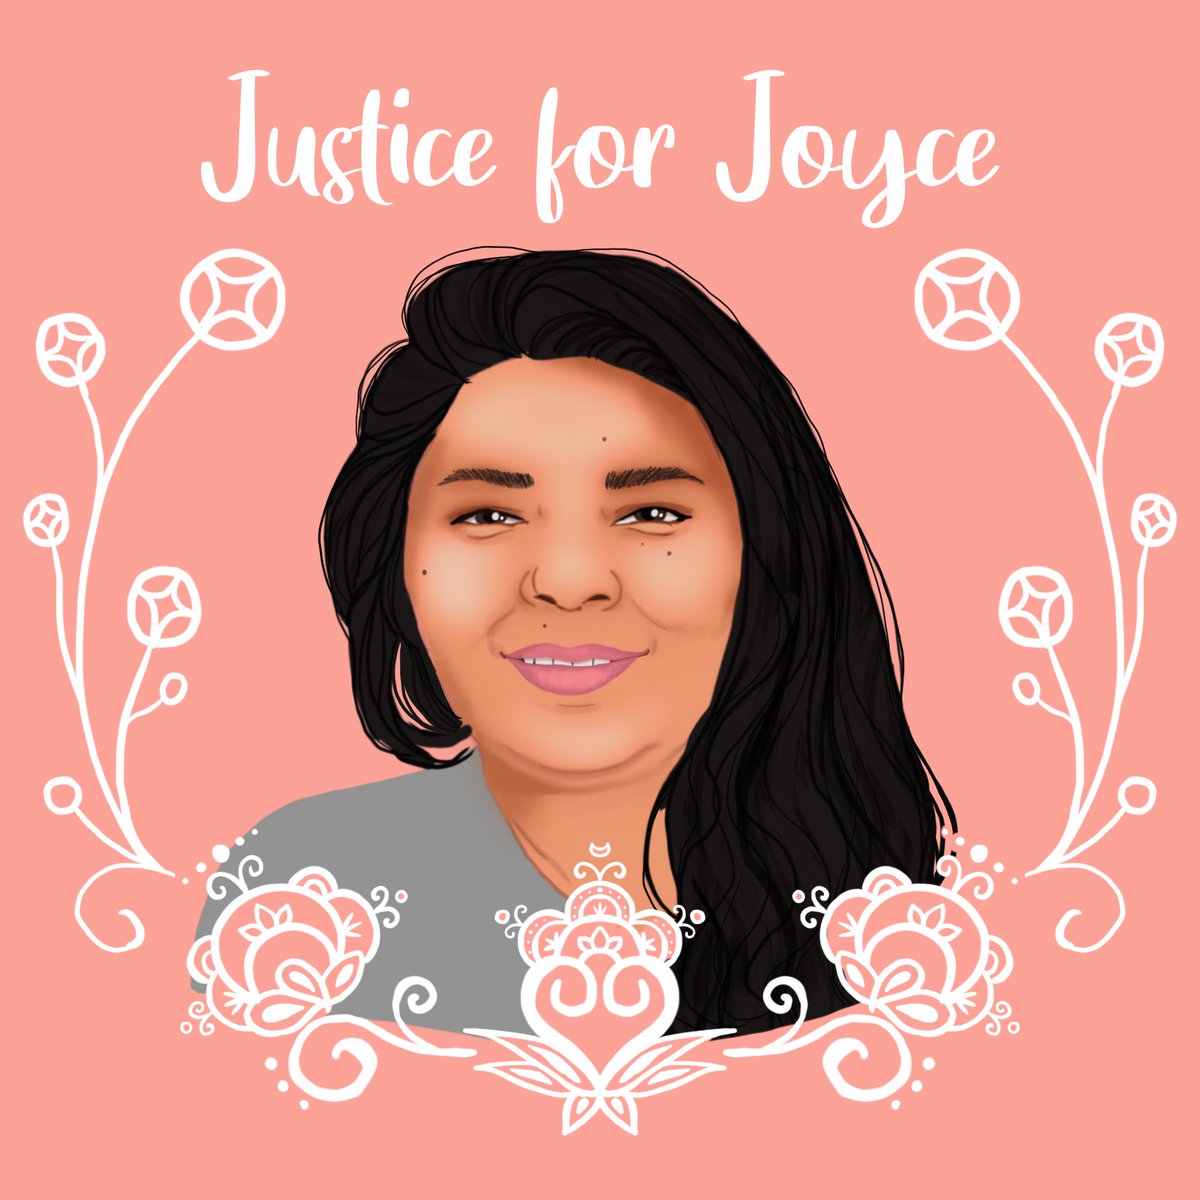 I’m upset and appalled about Joyce’s untimely death at the hands of healthcare workers. My condolences to her family and community. I created 3 portraits of her photo. Please share her story #MMIW #JusticeforJoyceEchaquan #JUSTICEFORJOYCE #JoyceEchaquan